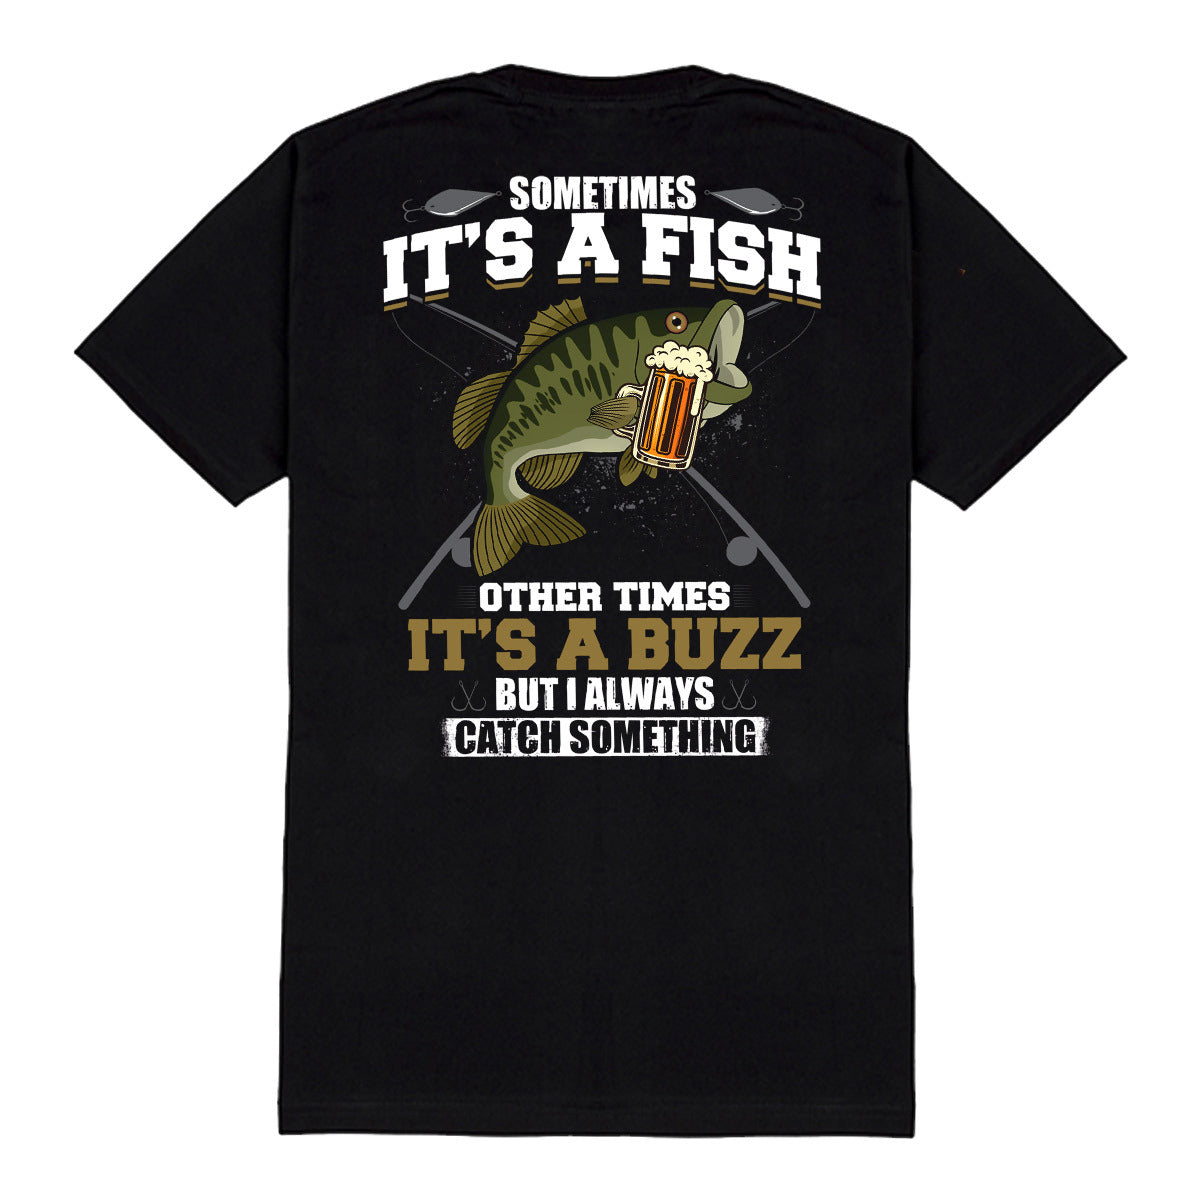 Sometimes It’S A Fish Other Times It’S A Buzz But I Always Catch Something Shirt, Fishing Shirt, Fish Shirt, Fish Lover Shirt, T-Shirt, Tee